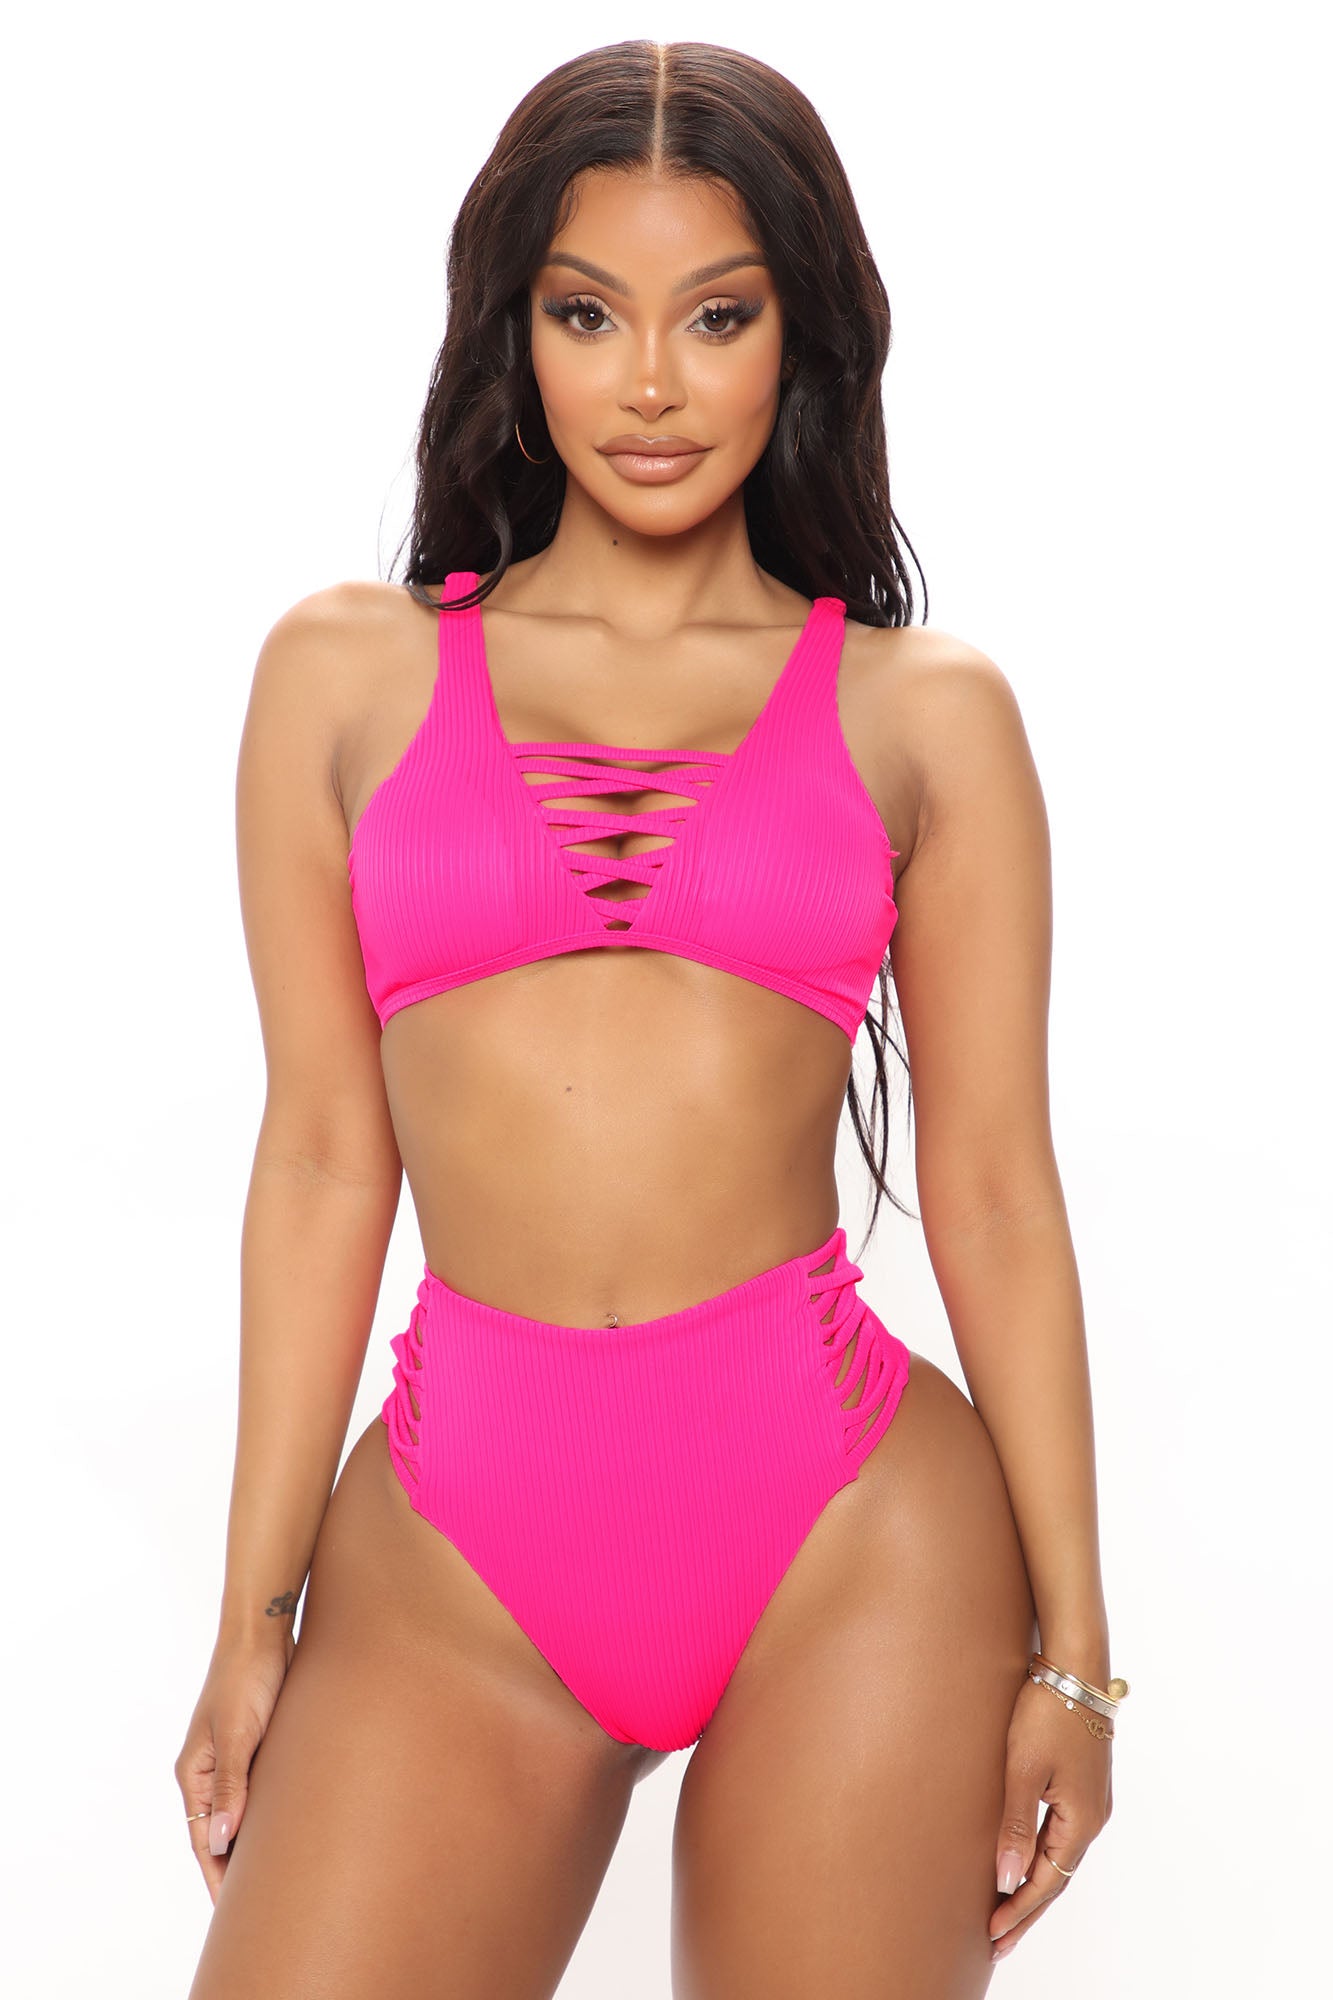 Beach Babe Alert! Turn up The Heat with This Hot and Happening One-Piece!  HIMIWAY Women's Split Fashion Irresistible Solid Color Bikini Beach  Swimsuit Hot Pink M 